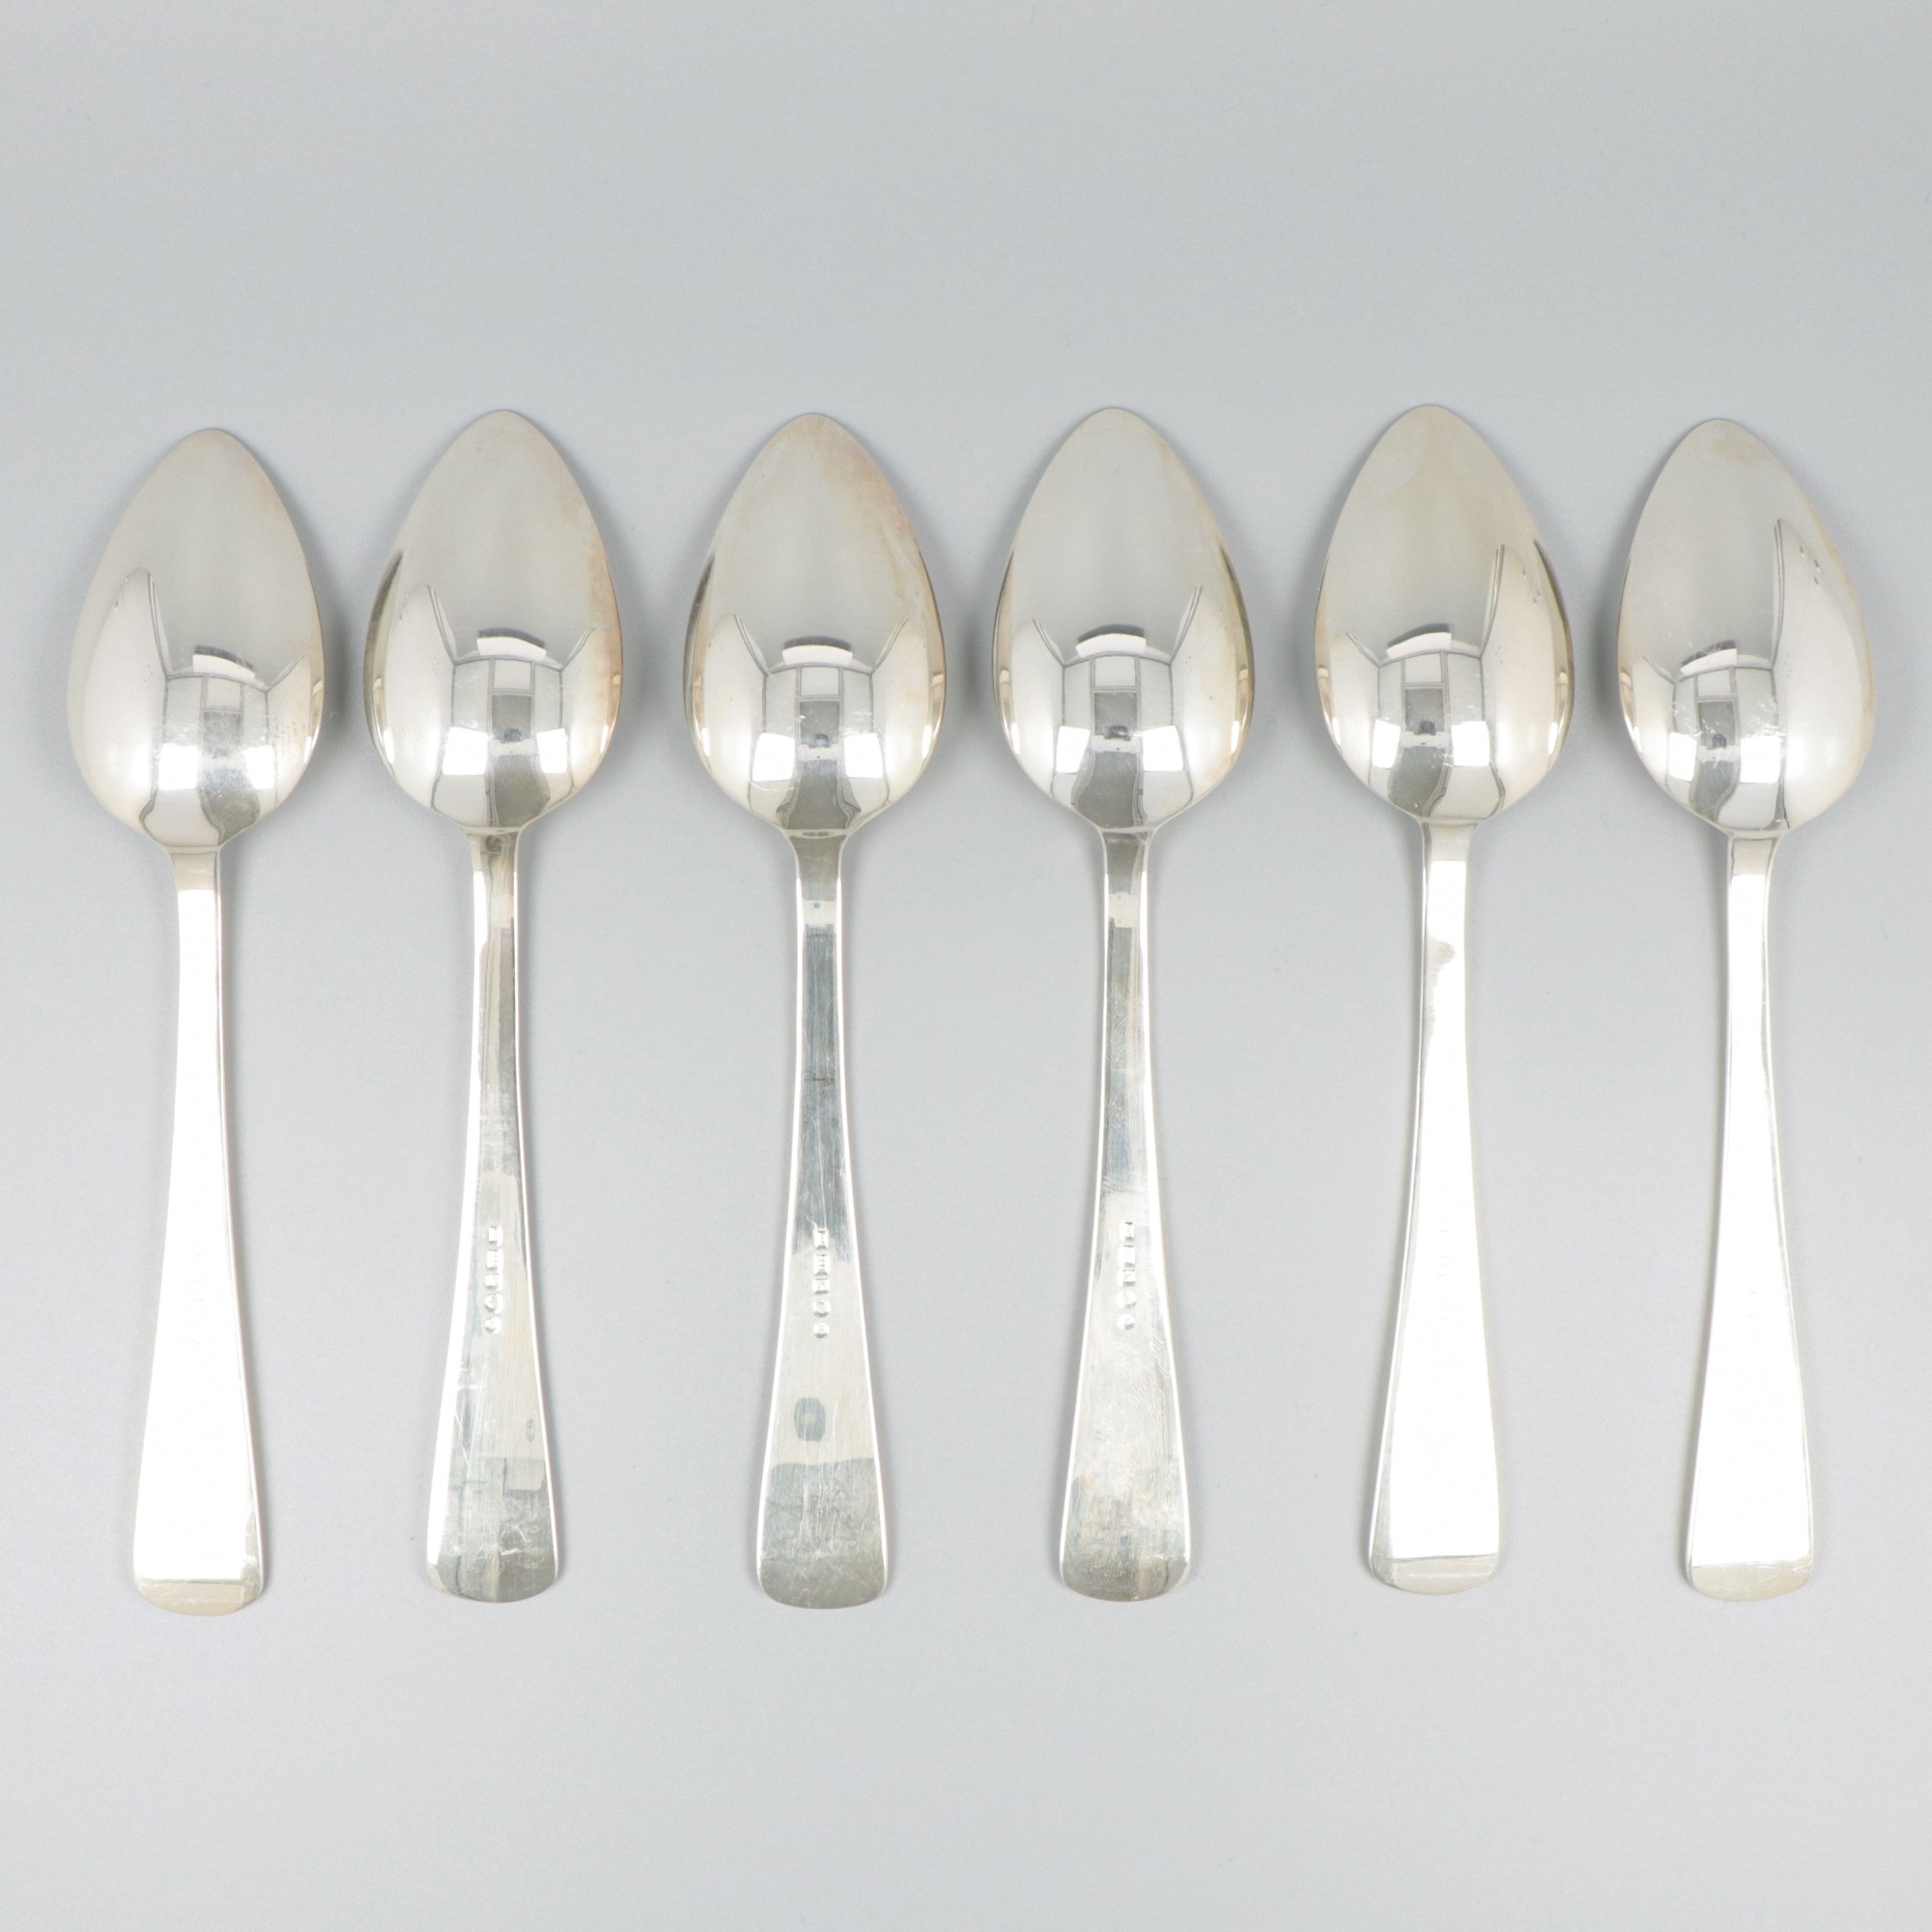 6 piece set of spoons "Haags Lofje" silver. - Image 2 of 5